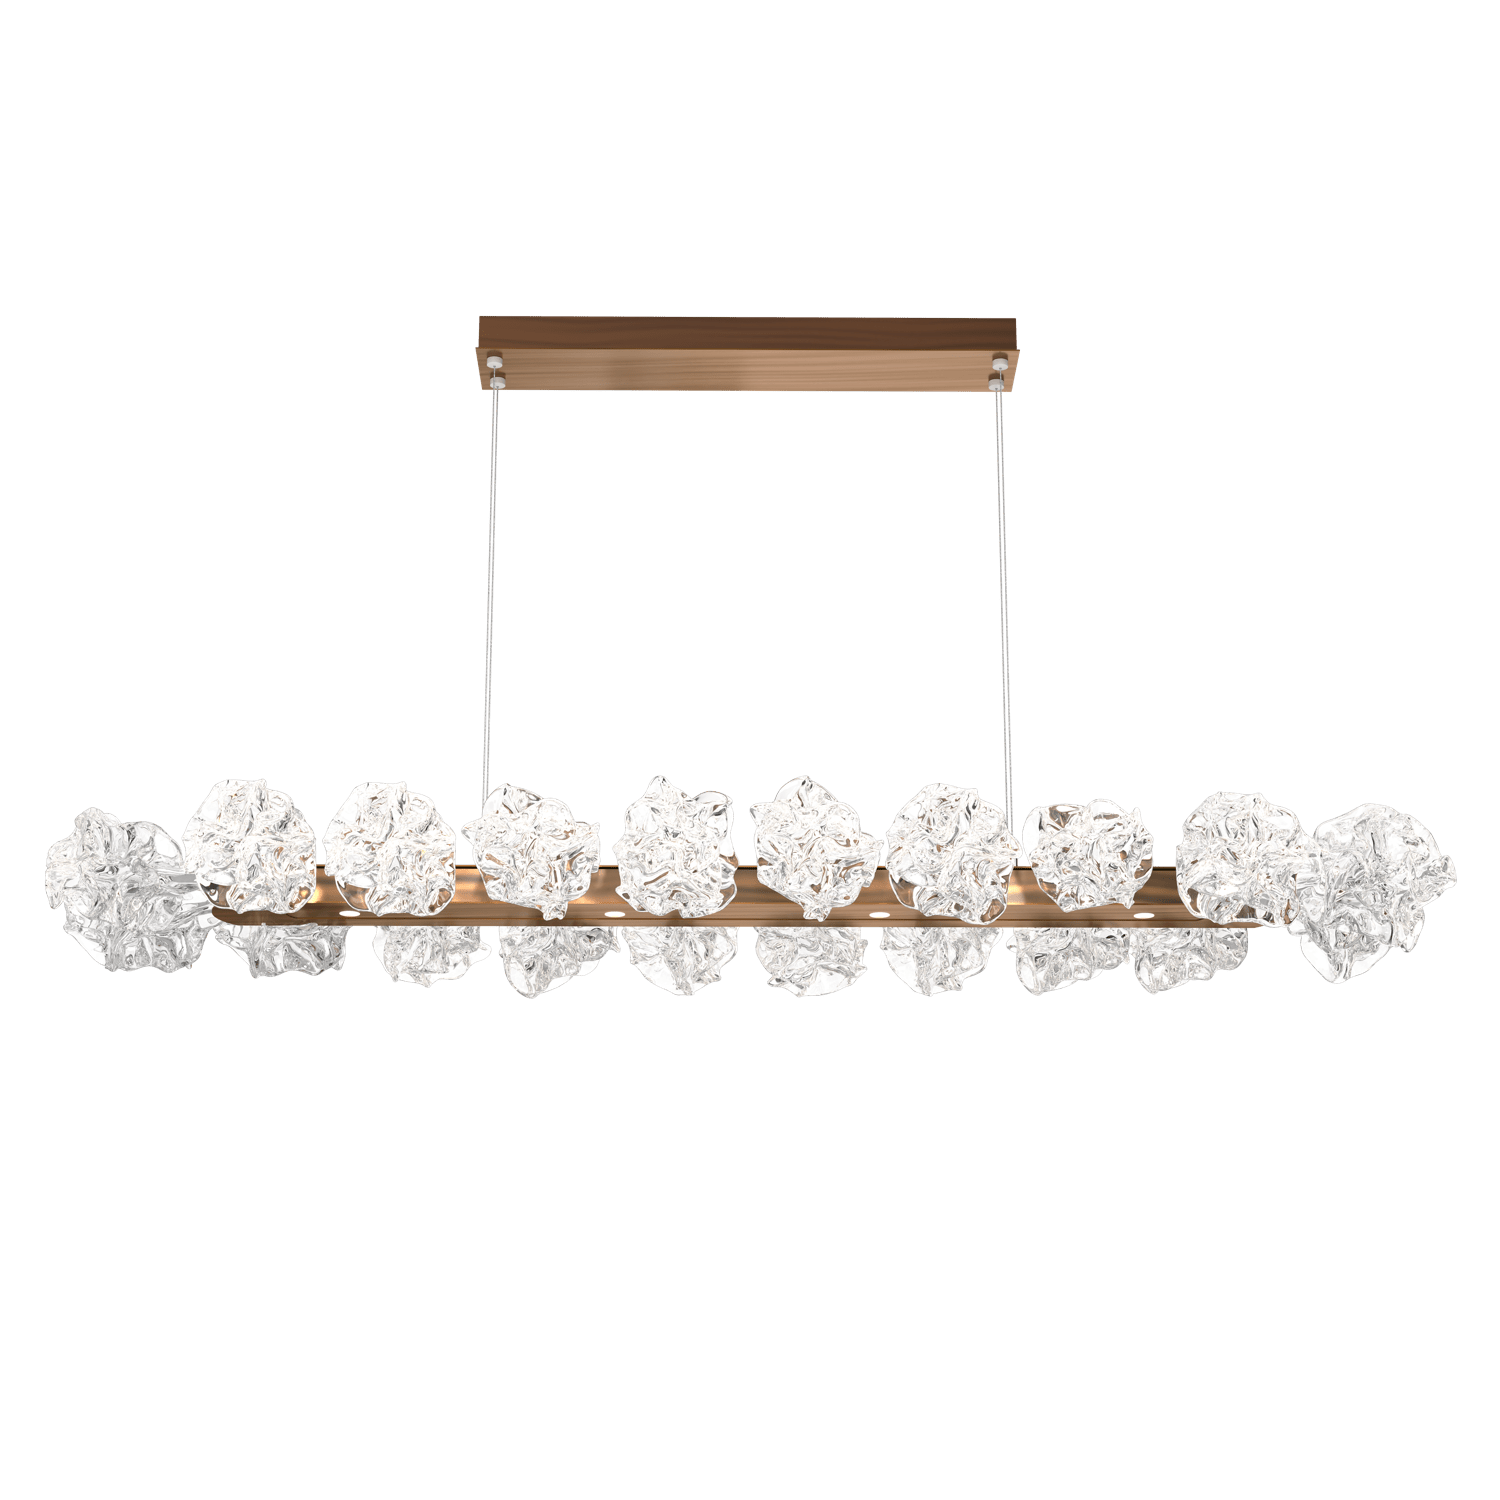 PLB0059-60-RB-Hammerton-Studio-Blossom-60-inch-linear-chandelier-with-oil-rubbed-bronze-finish-and-clear-handblown-crystal-glass-shades-and-LED-lamping